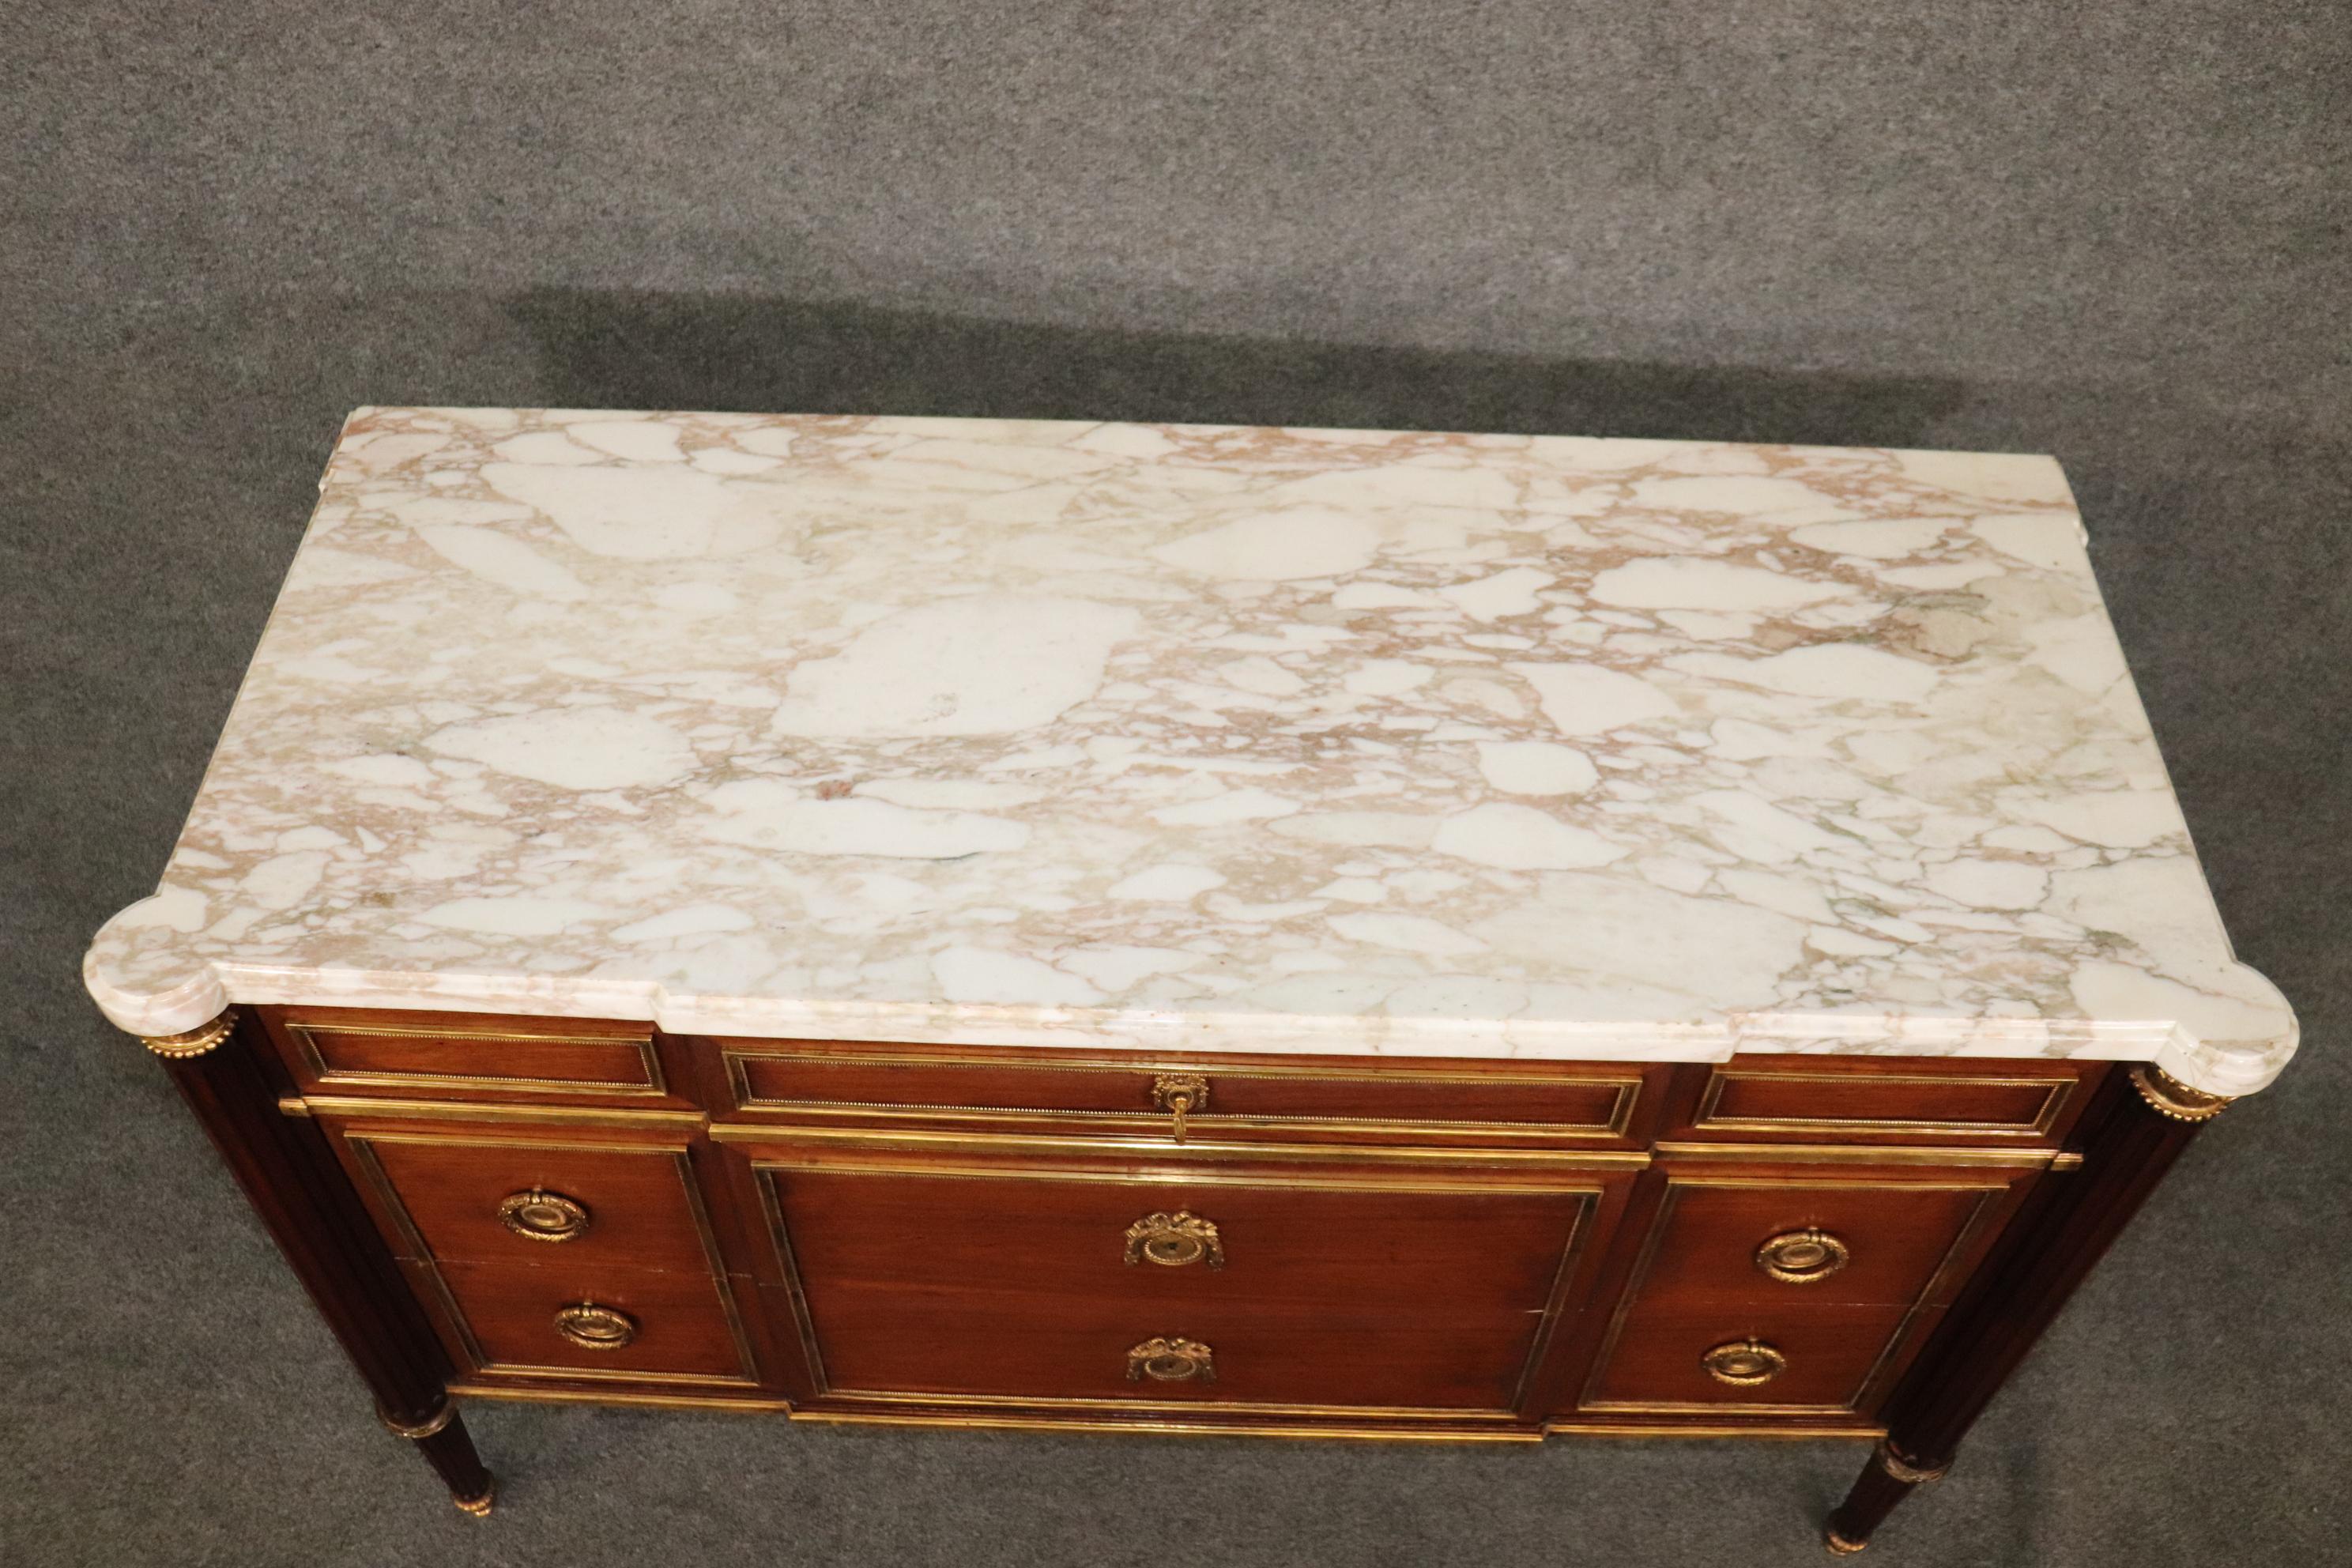 This is a spectacular Maison Jansen style French-made Directoire commode in very good condition with its original finish and superbly cast bronze mounts. The commode has a gorgeous slab of marble on top and three drawers. The commode dates to the